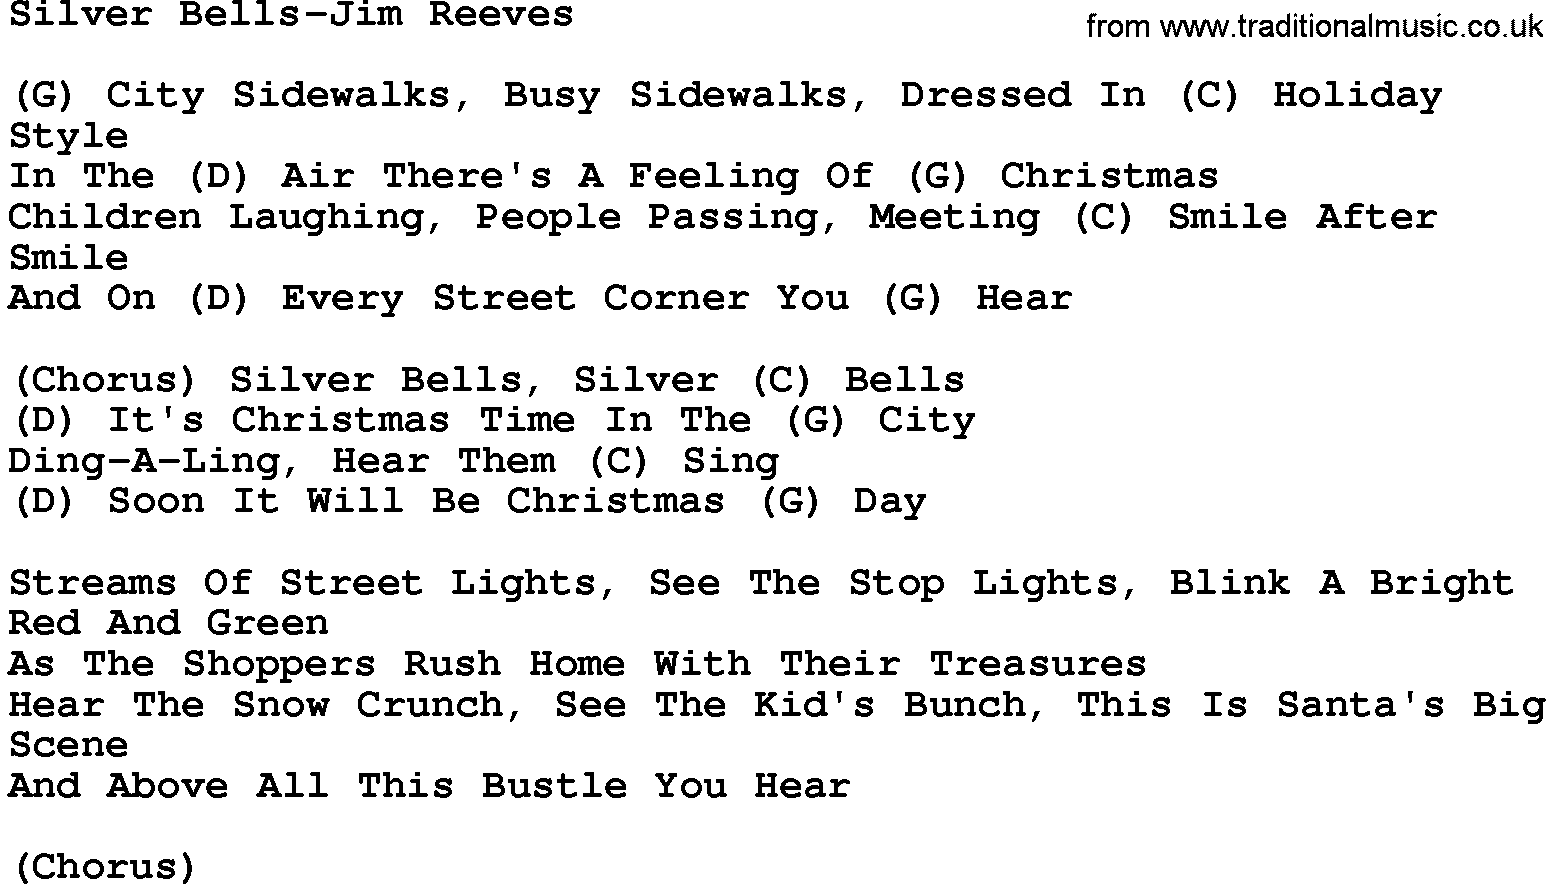 Country music song: Silver Bells-Jim Reeves lyrics and chords